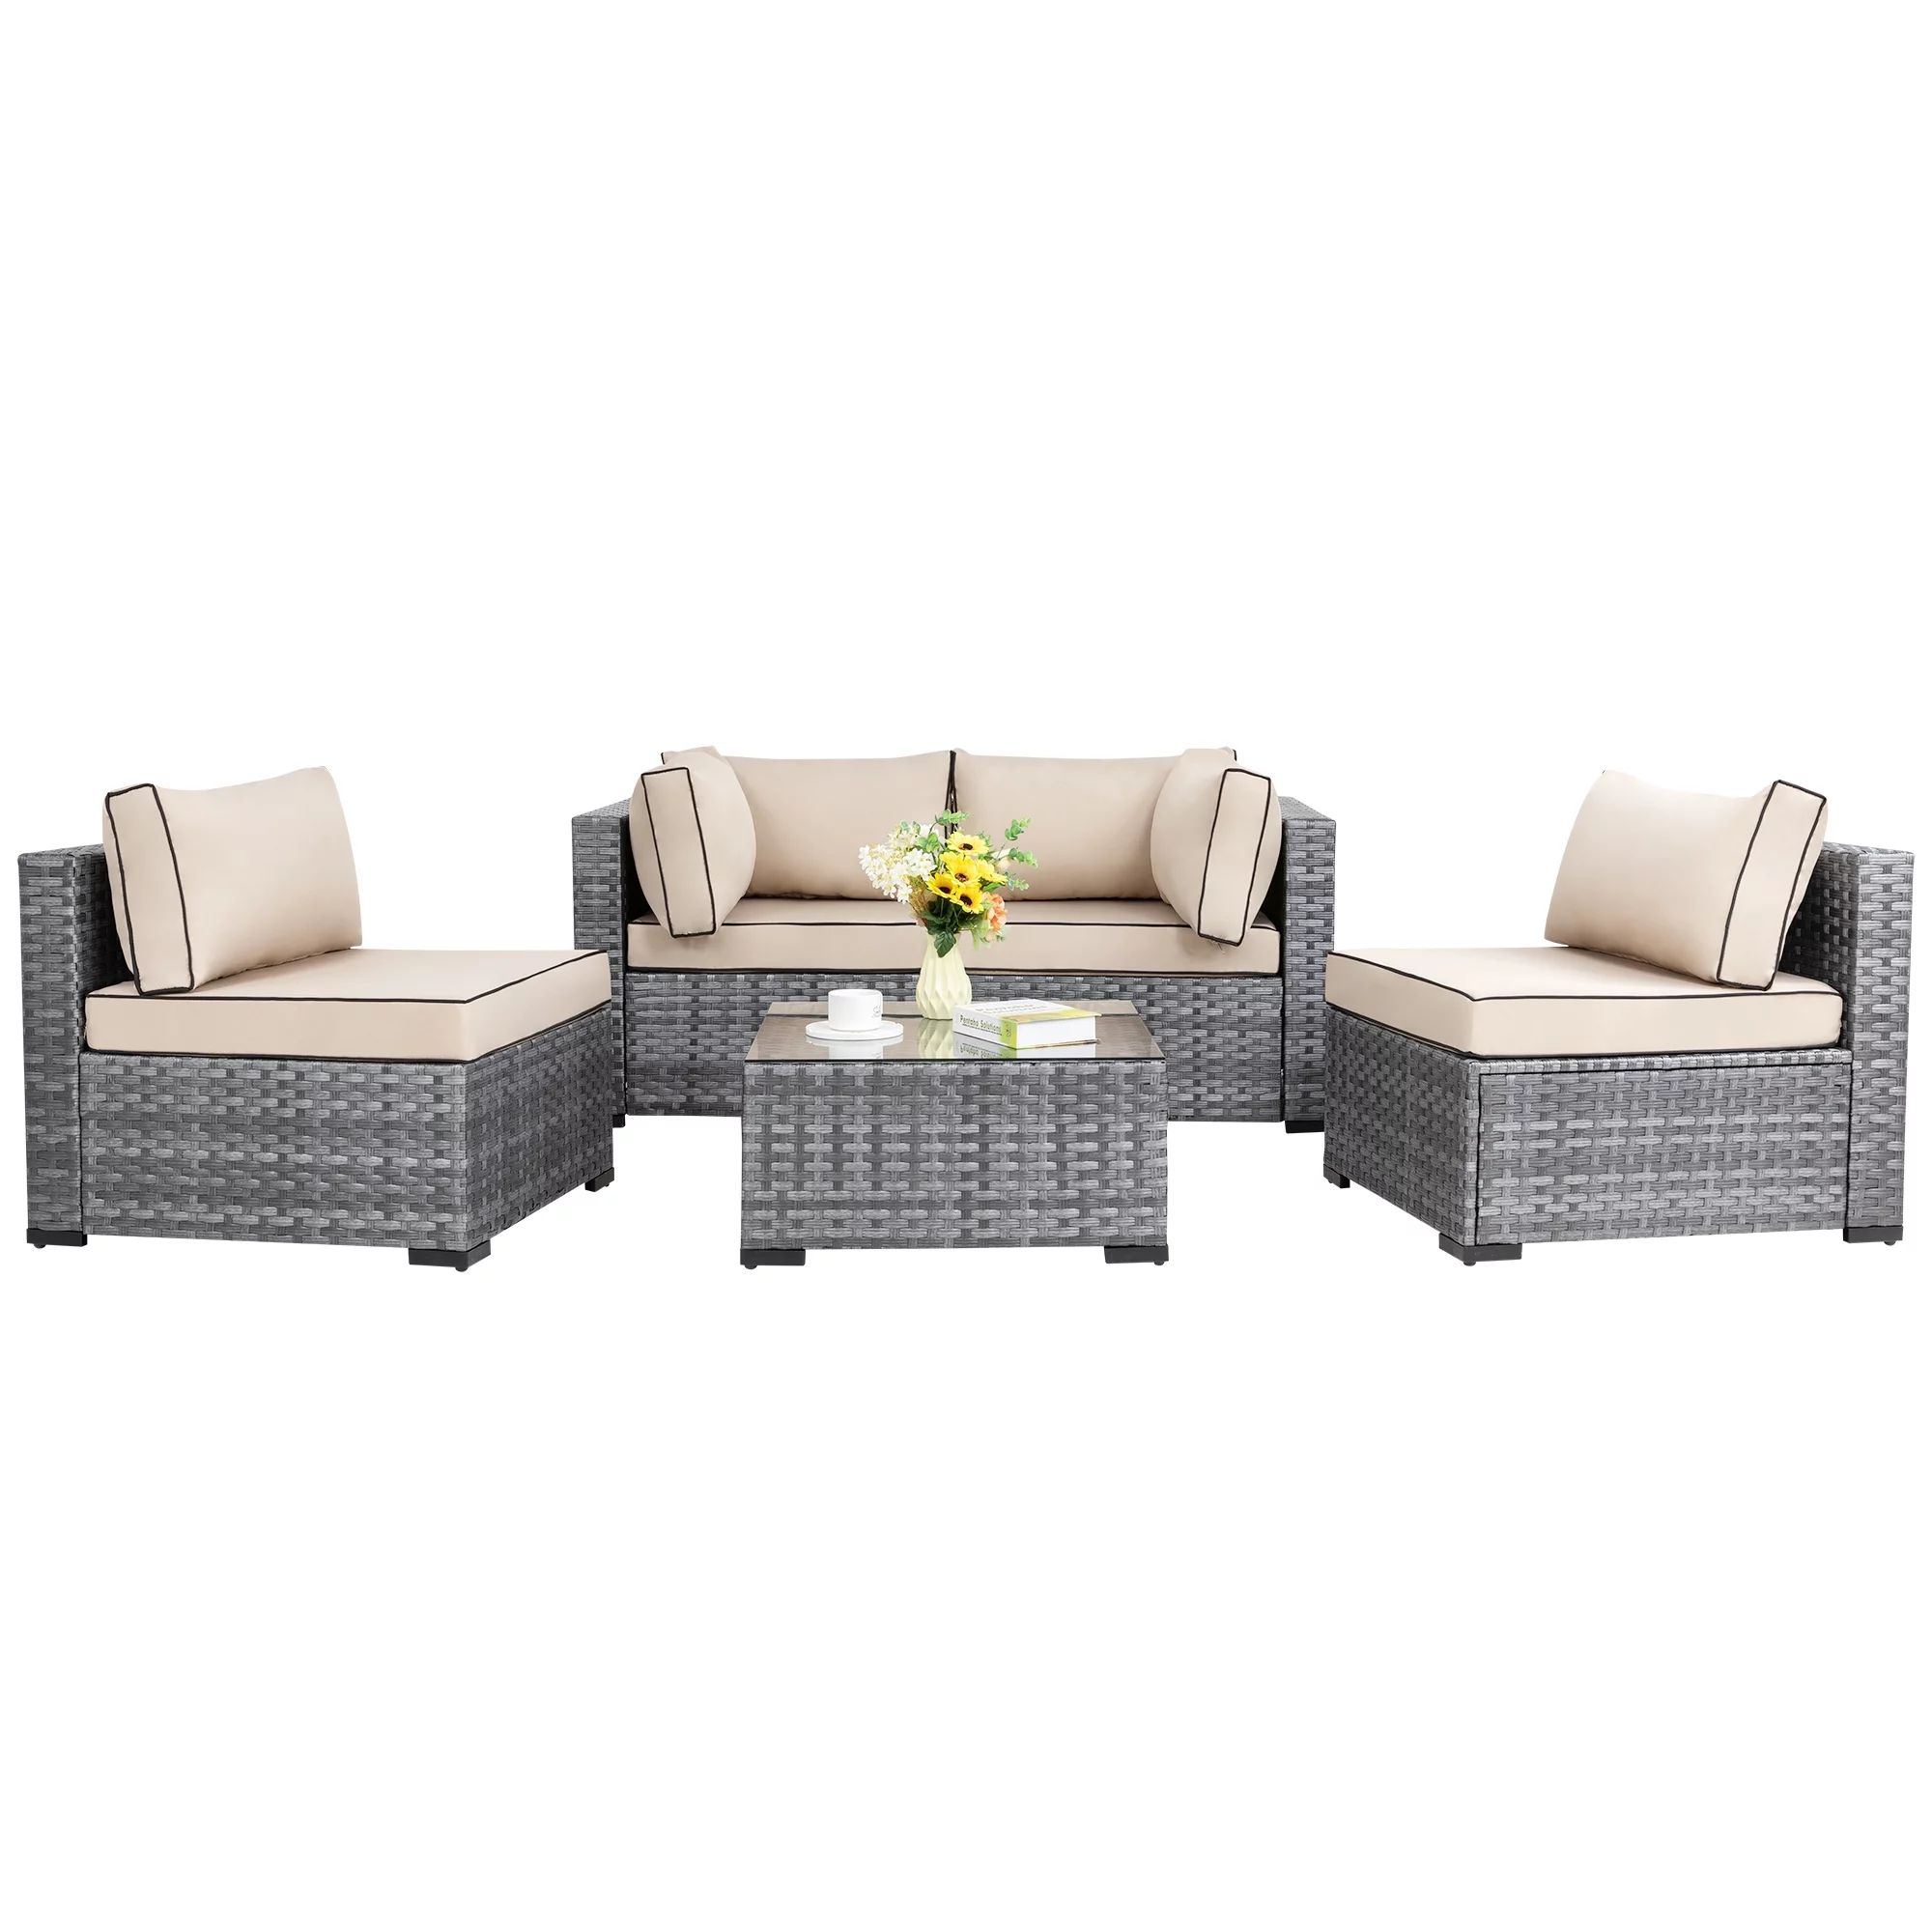 Walsunny 5 Pieces Patio Furniture Sets, Wicker Rattan Outdoor Sectional Sofa with Glass Table and... | Walmart (US)